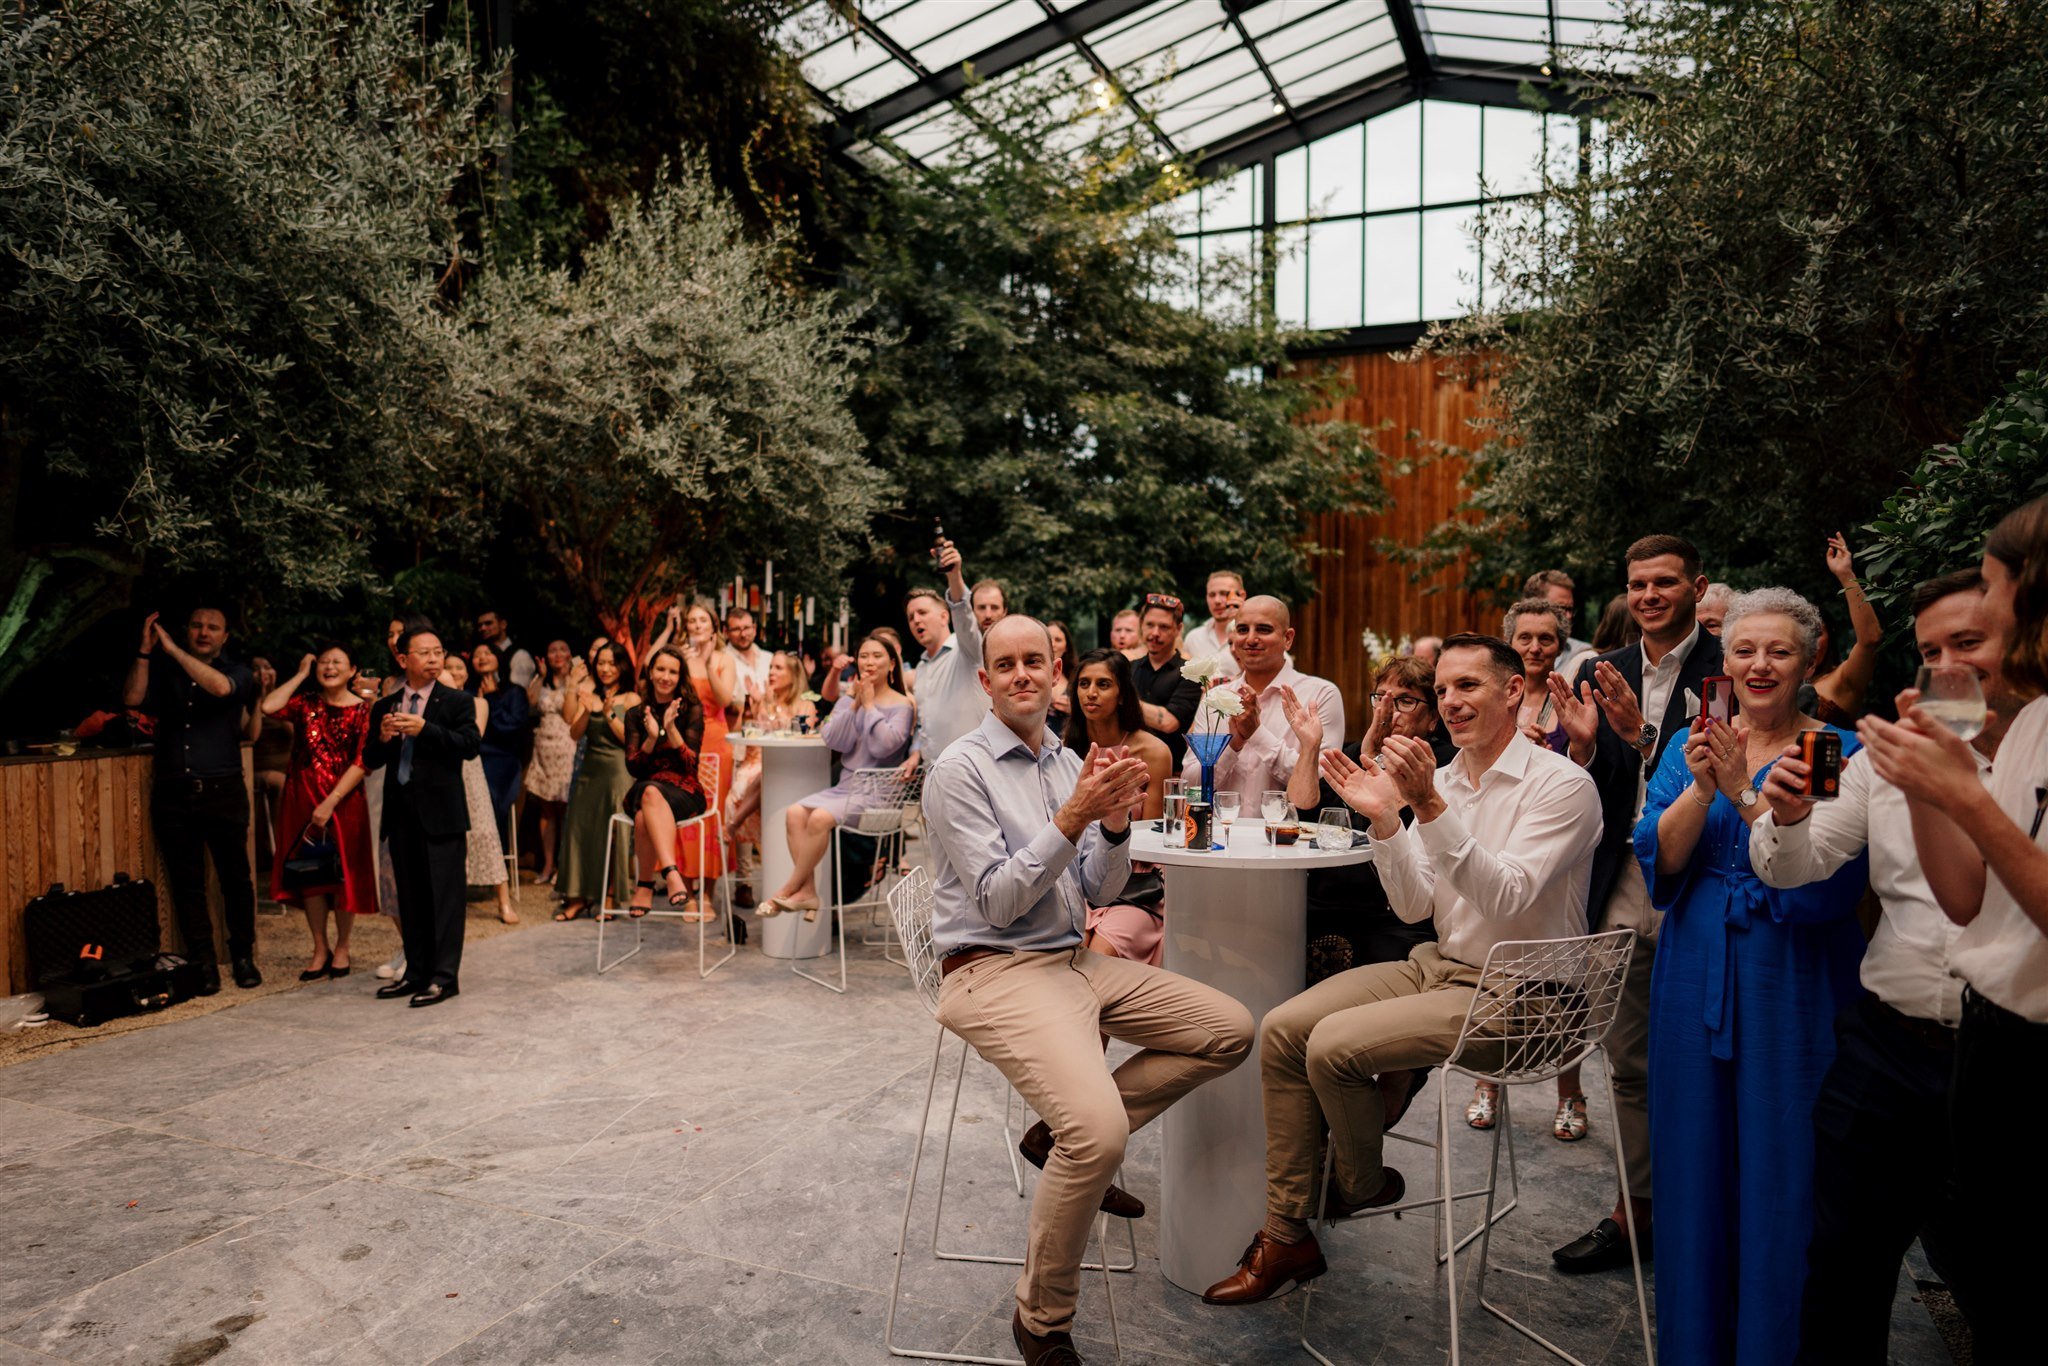 glasshouse-morningside-top-auckland-wedding-phtographer-photography-videography-film-new-zealand-NZ-best-urban-venue-stylish-intimate-central-ceremony-reception-dear-white-productions (26).jpg